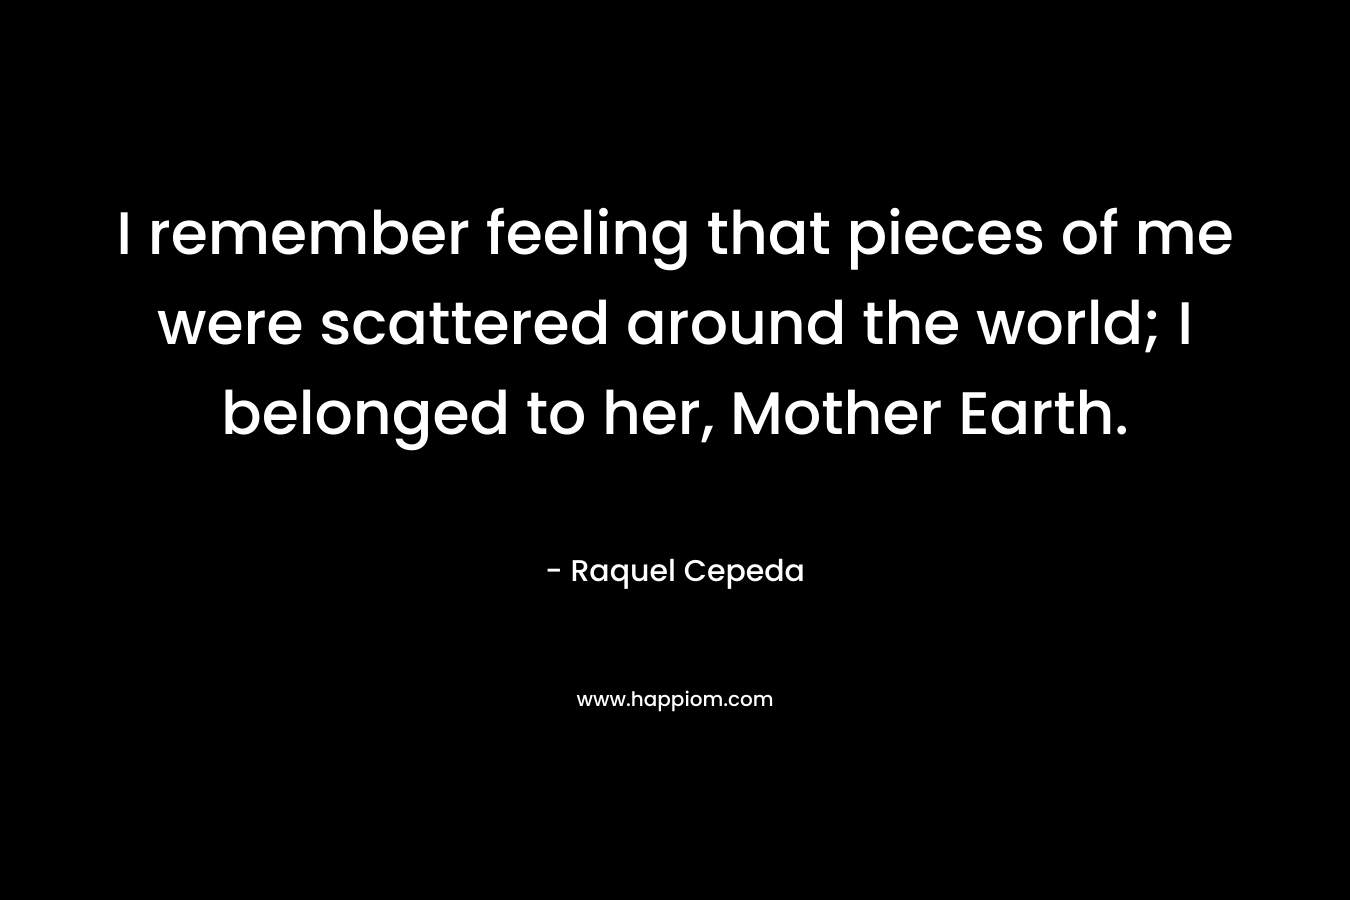 I remember feeling that pieces of me were scattered around the world; I belonged to her, Mother Earth. – Raquel Cepeda